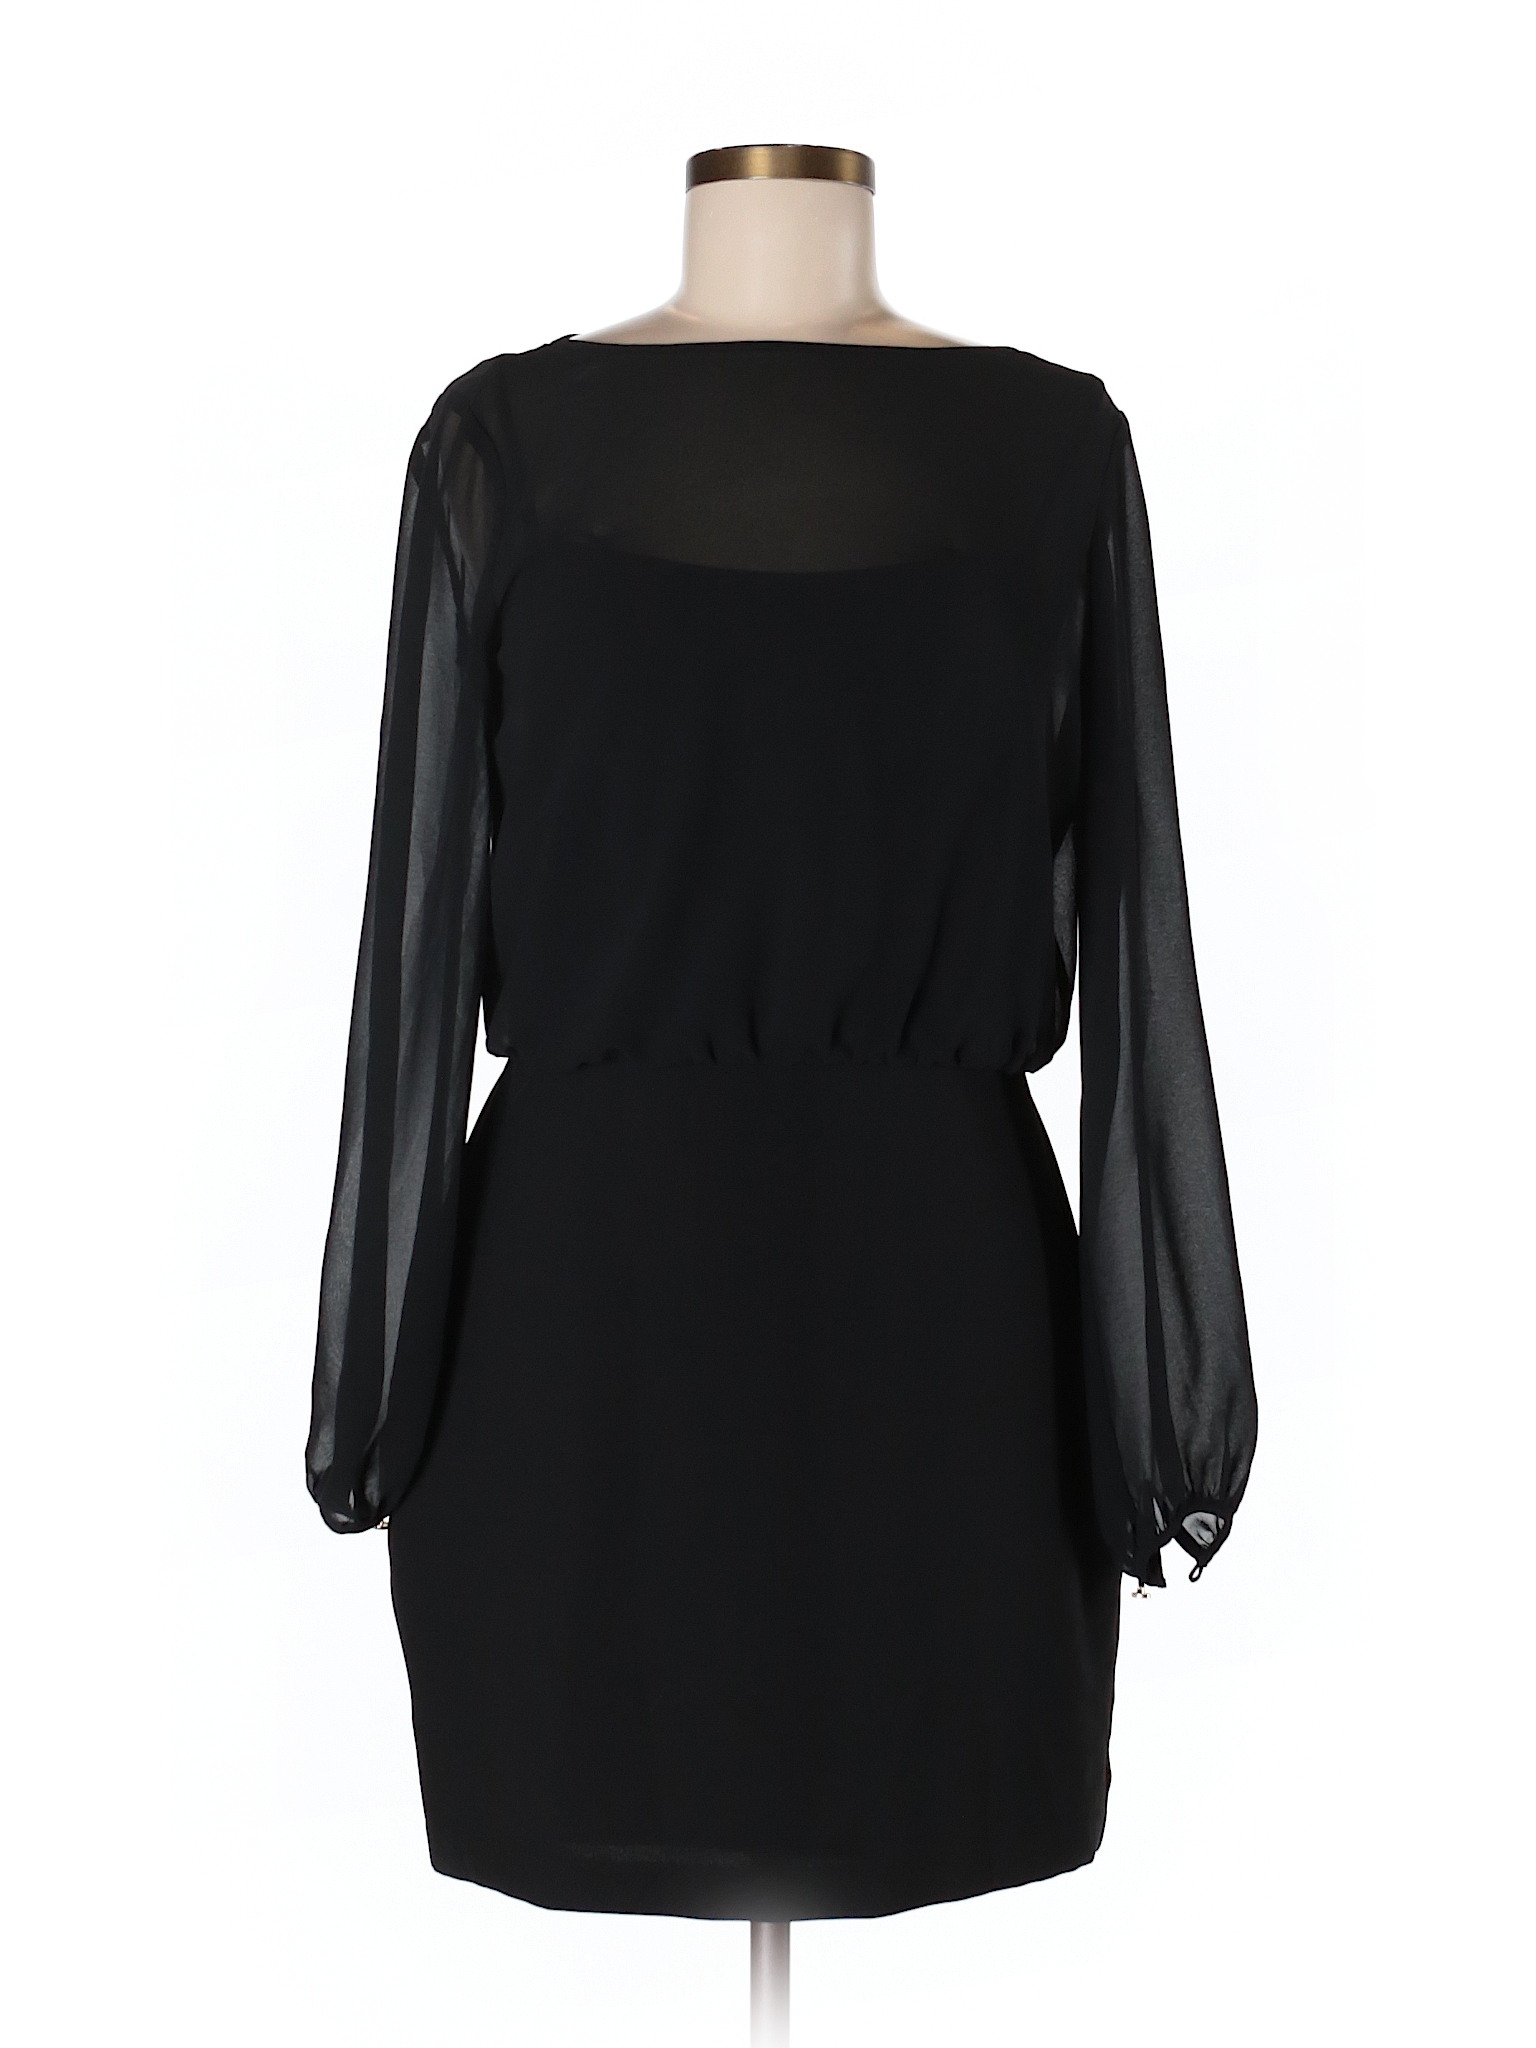 Banana Republic 100% Polyester Solid Black Casual Dress Size 8 - 79% ...